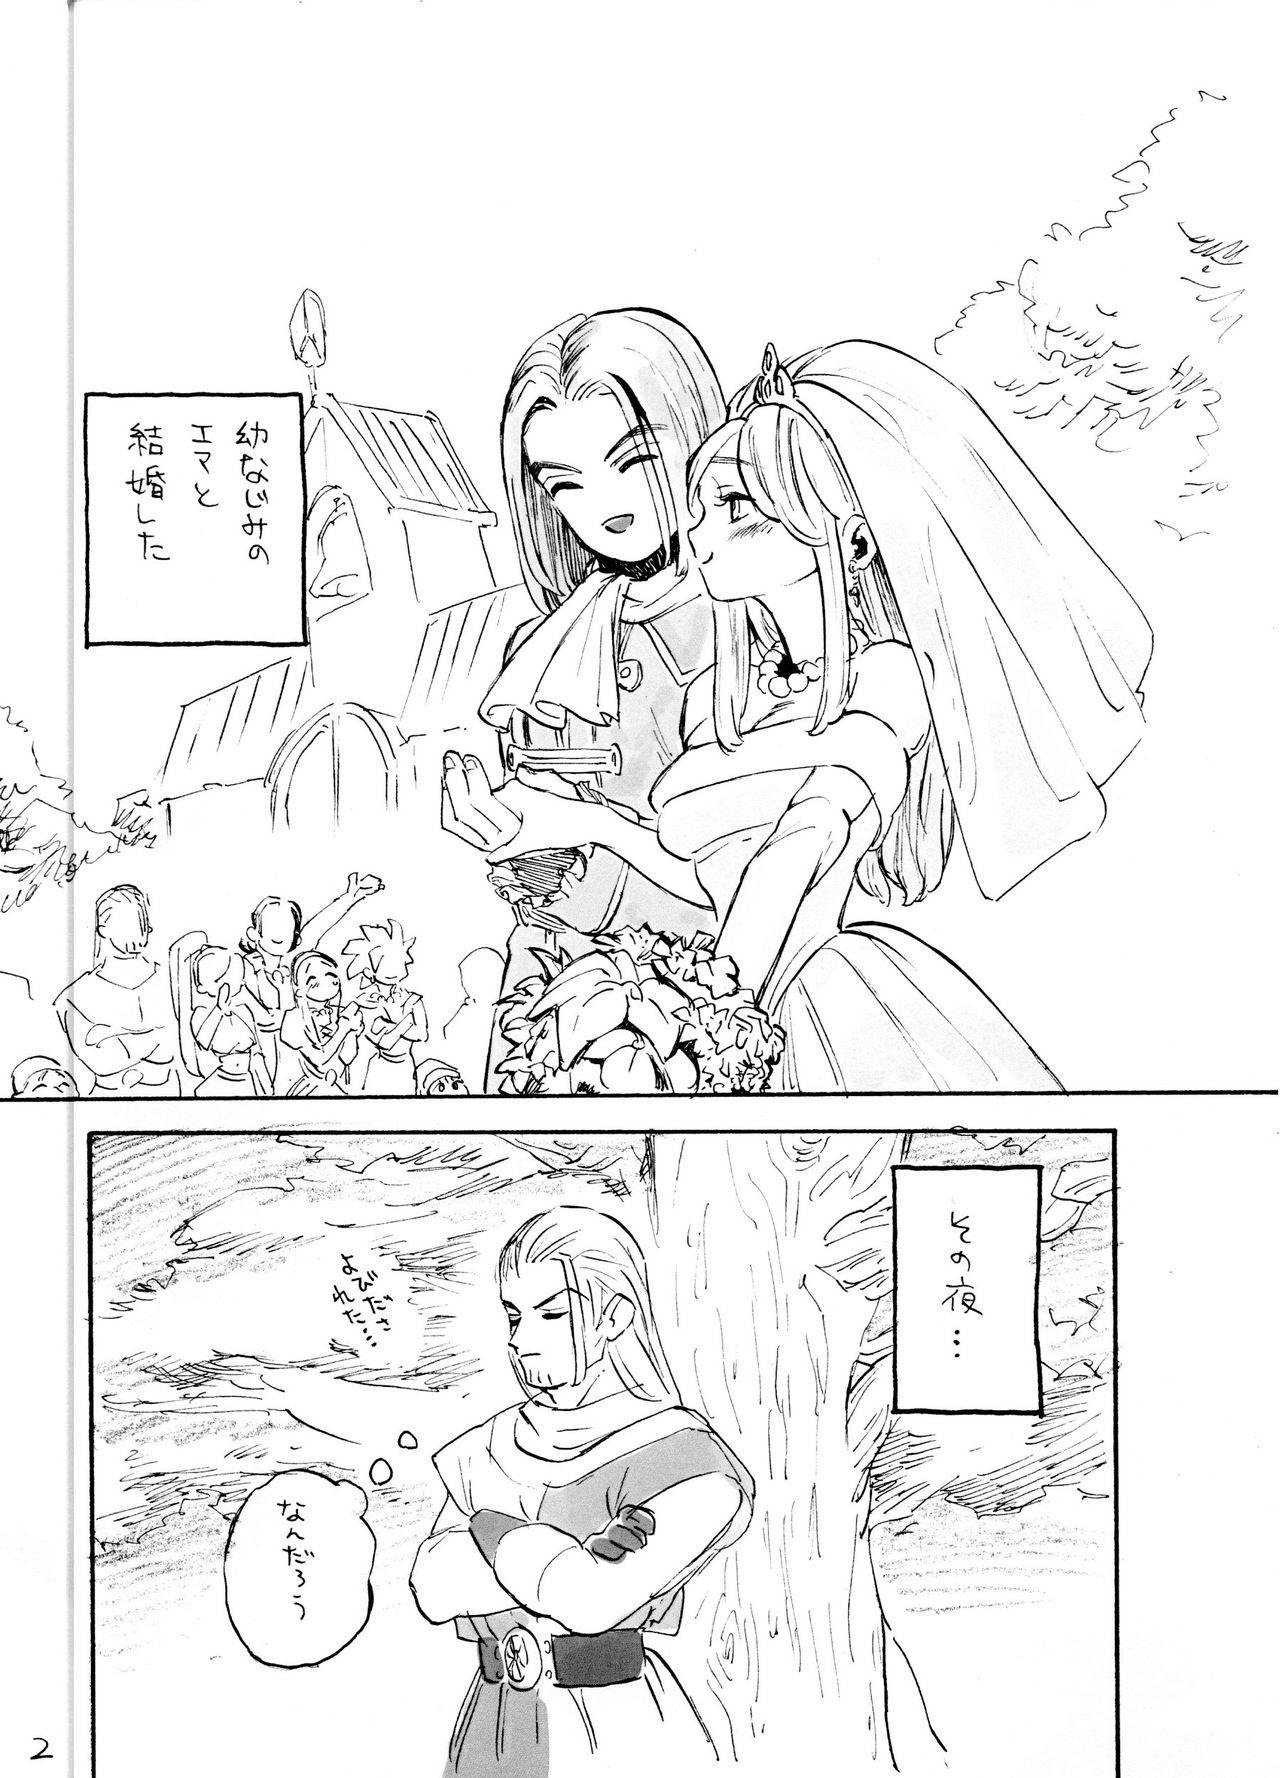 Pussy Play Yuusha no Tate R18 - Dragon quest xi Hot Naked Women - Page 2